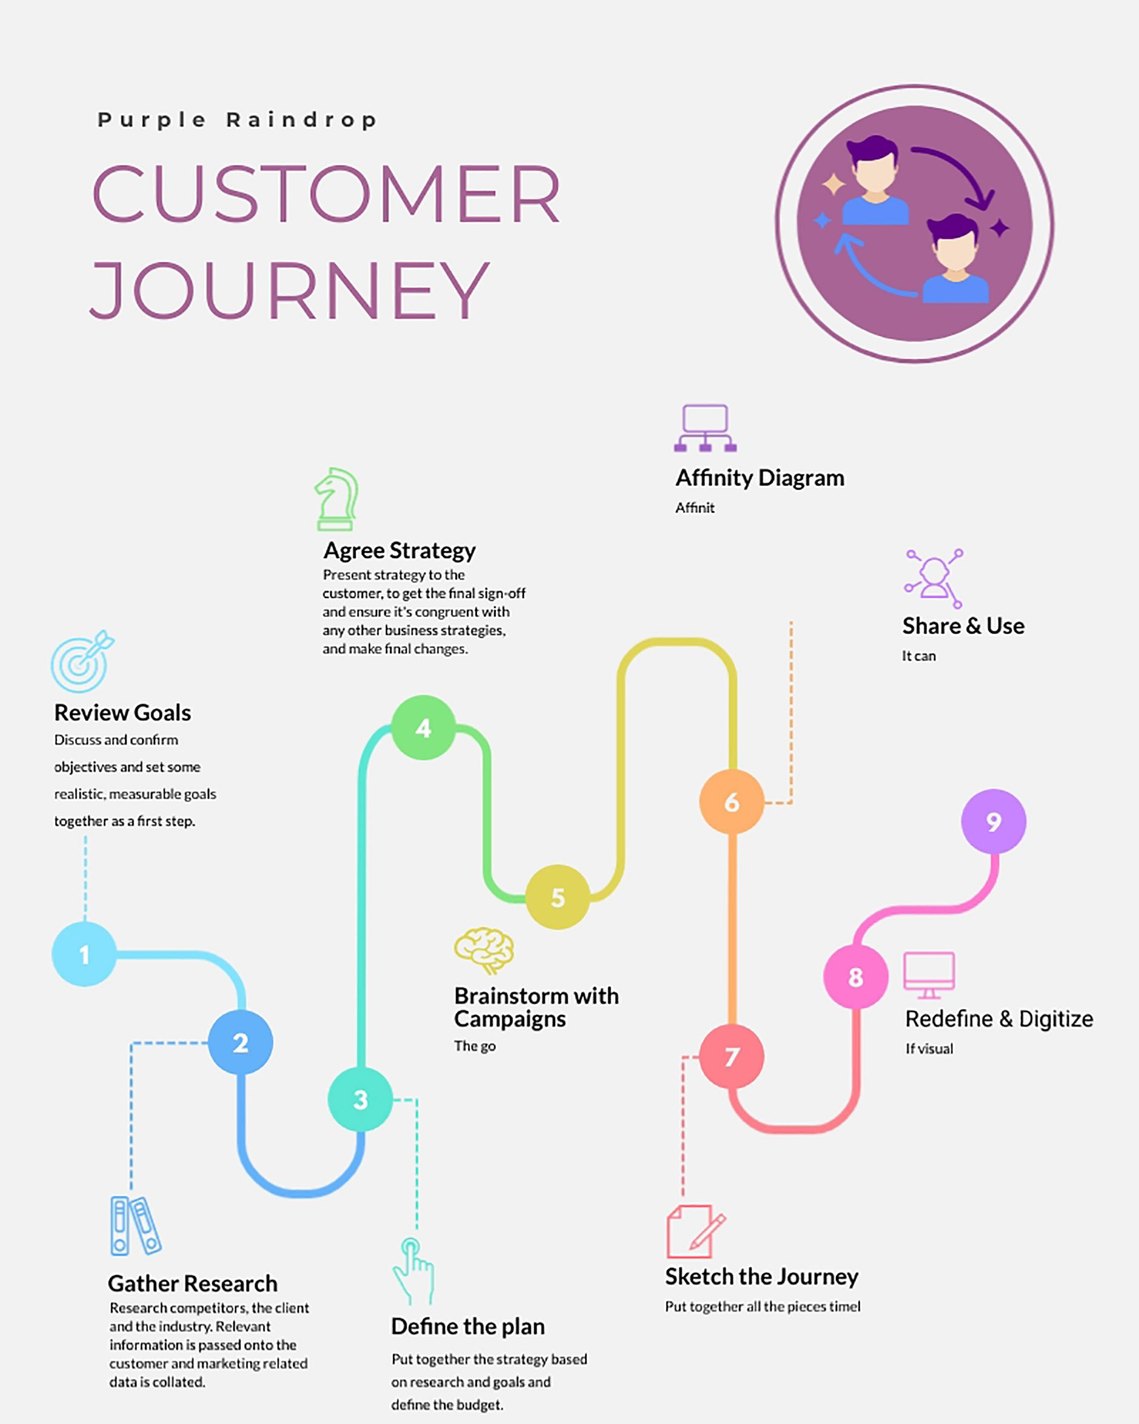 A Purple Raindrop customer journey is not typical and can vary depending on what you need to engage with us for. We can assist with production, project management, branding. 